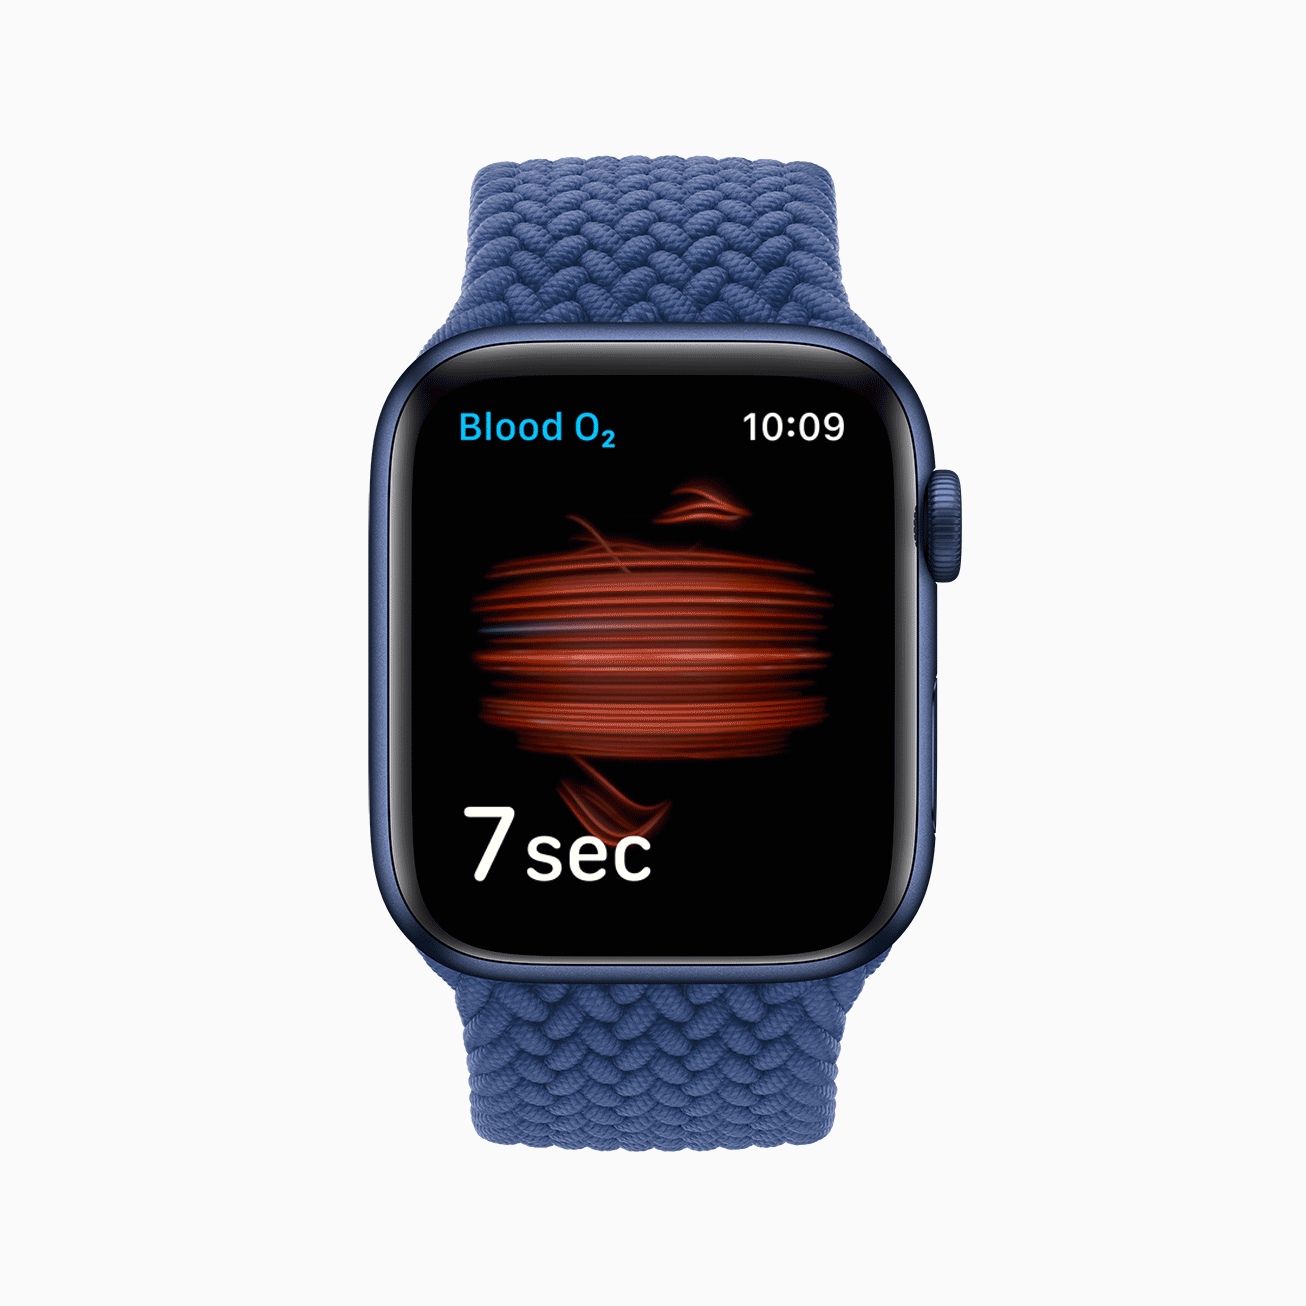 animated GIF of the blood oxygen monitor feature on the Apple Watch Series 6